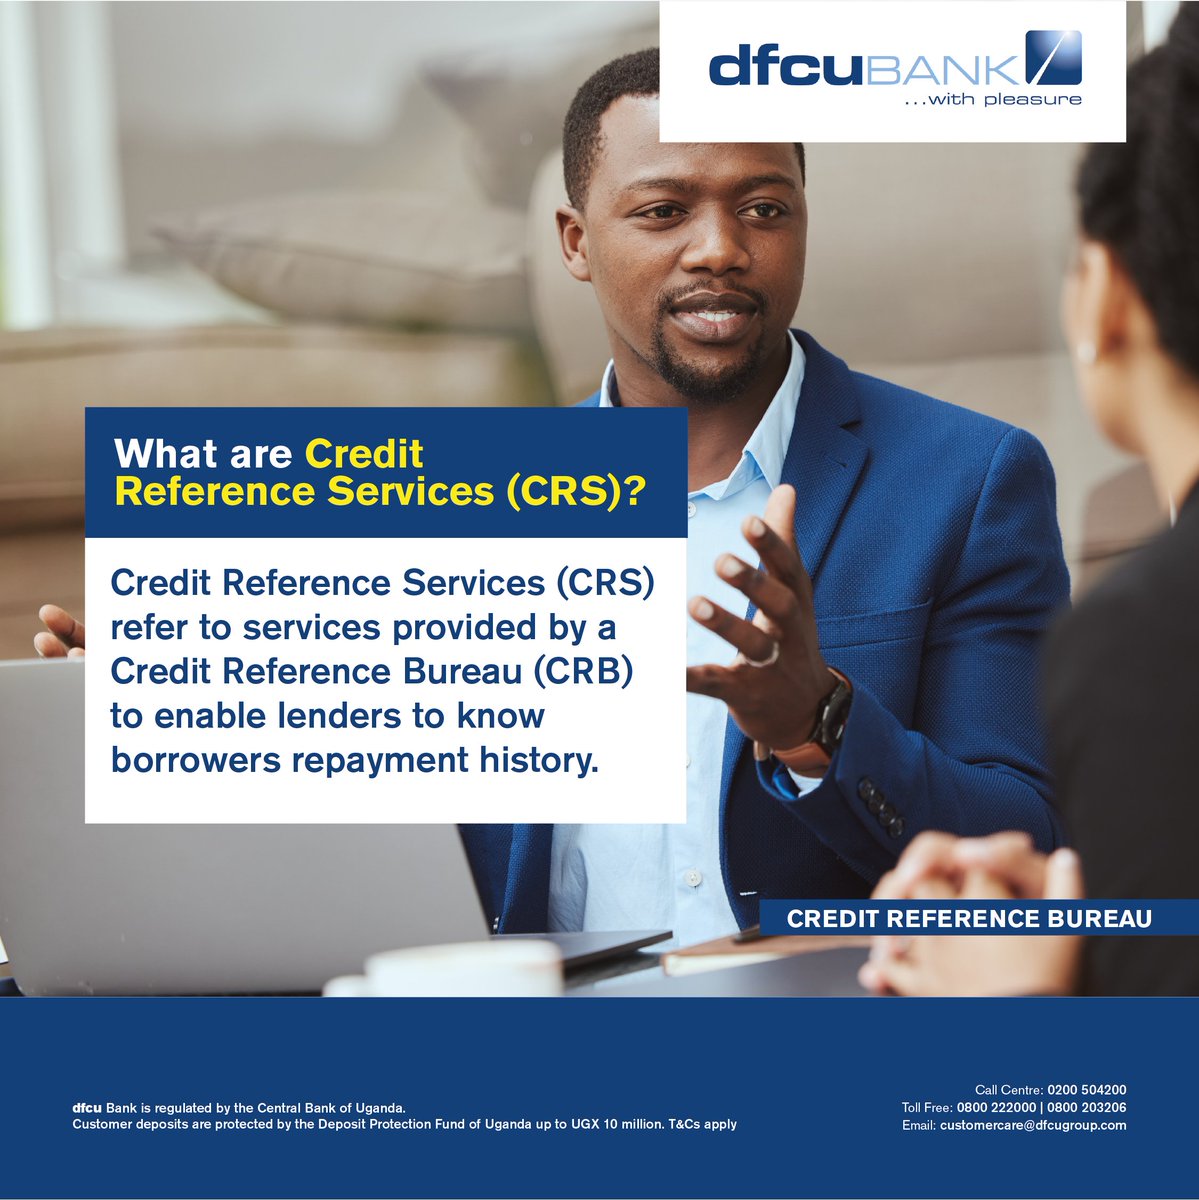 What are Credit Reference Services? Visit dfcugroup.com/credit-referen… for more information.